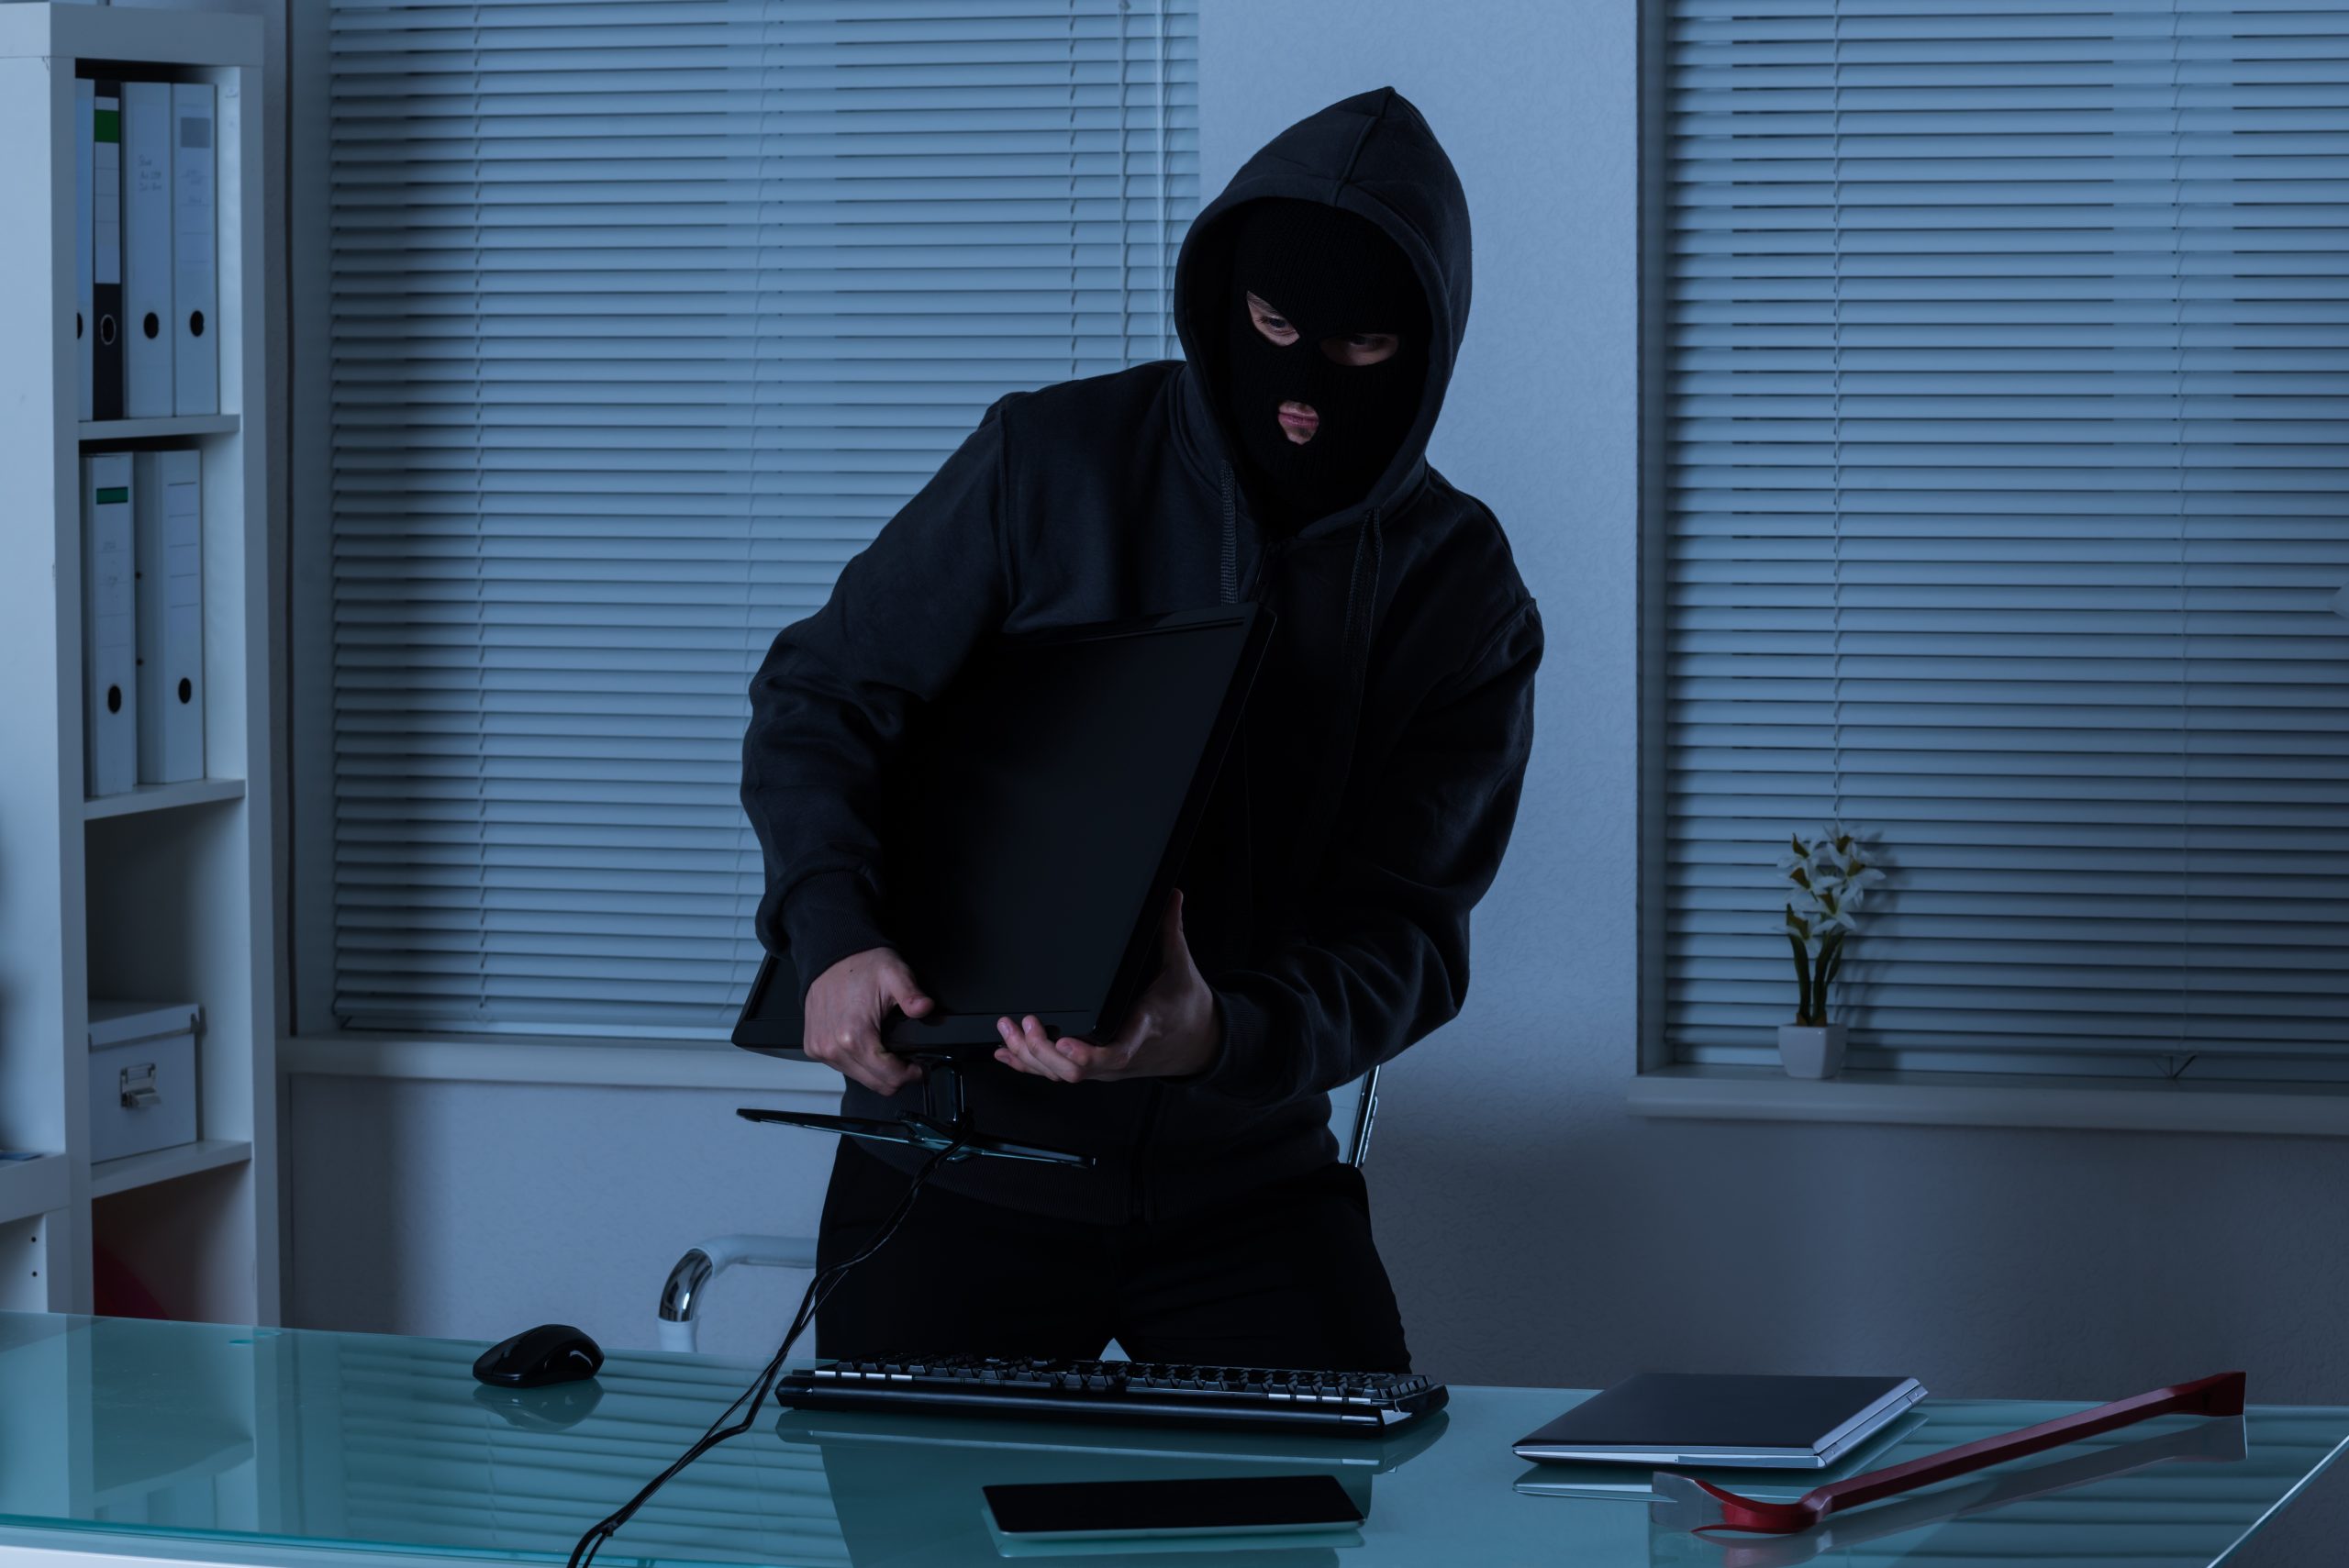 Featured image for “<font color="#282828";>How to prevent crime in the workplace</font>”